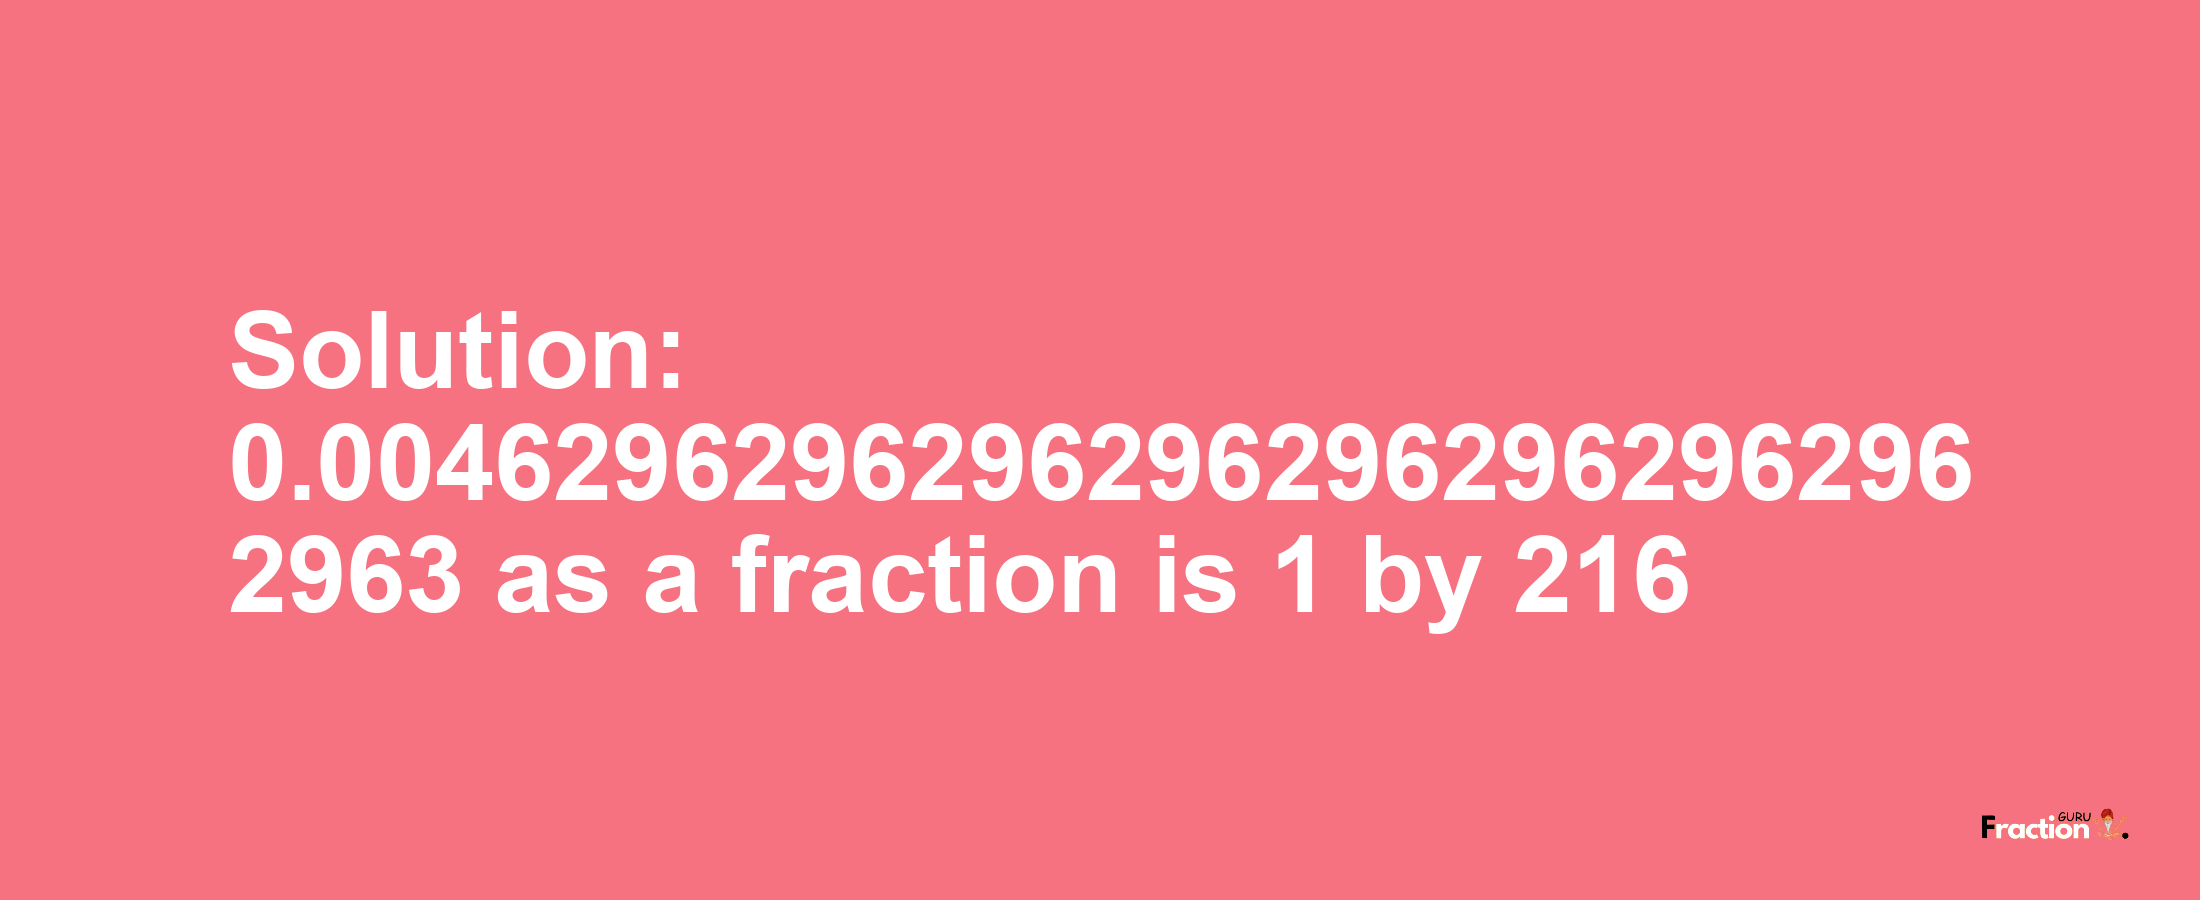 Solution:0.00462962962962962962962962962963 as a fraction is 1/216